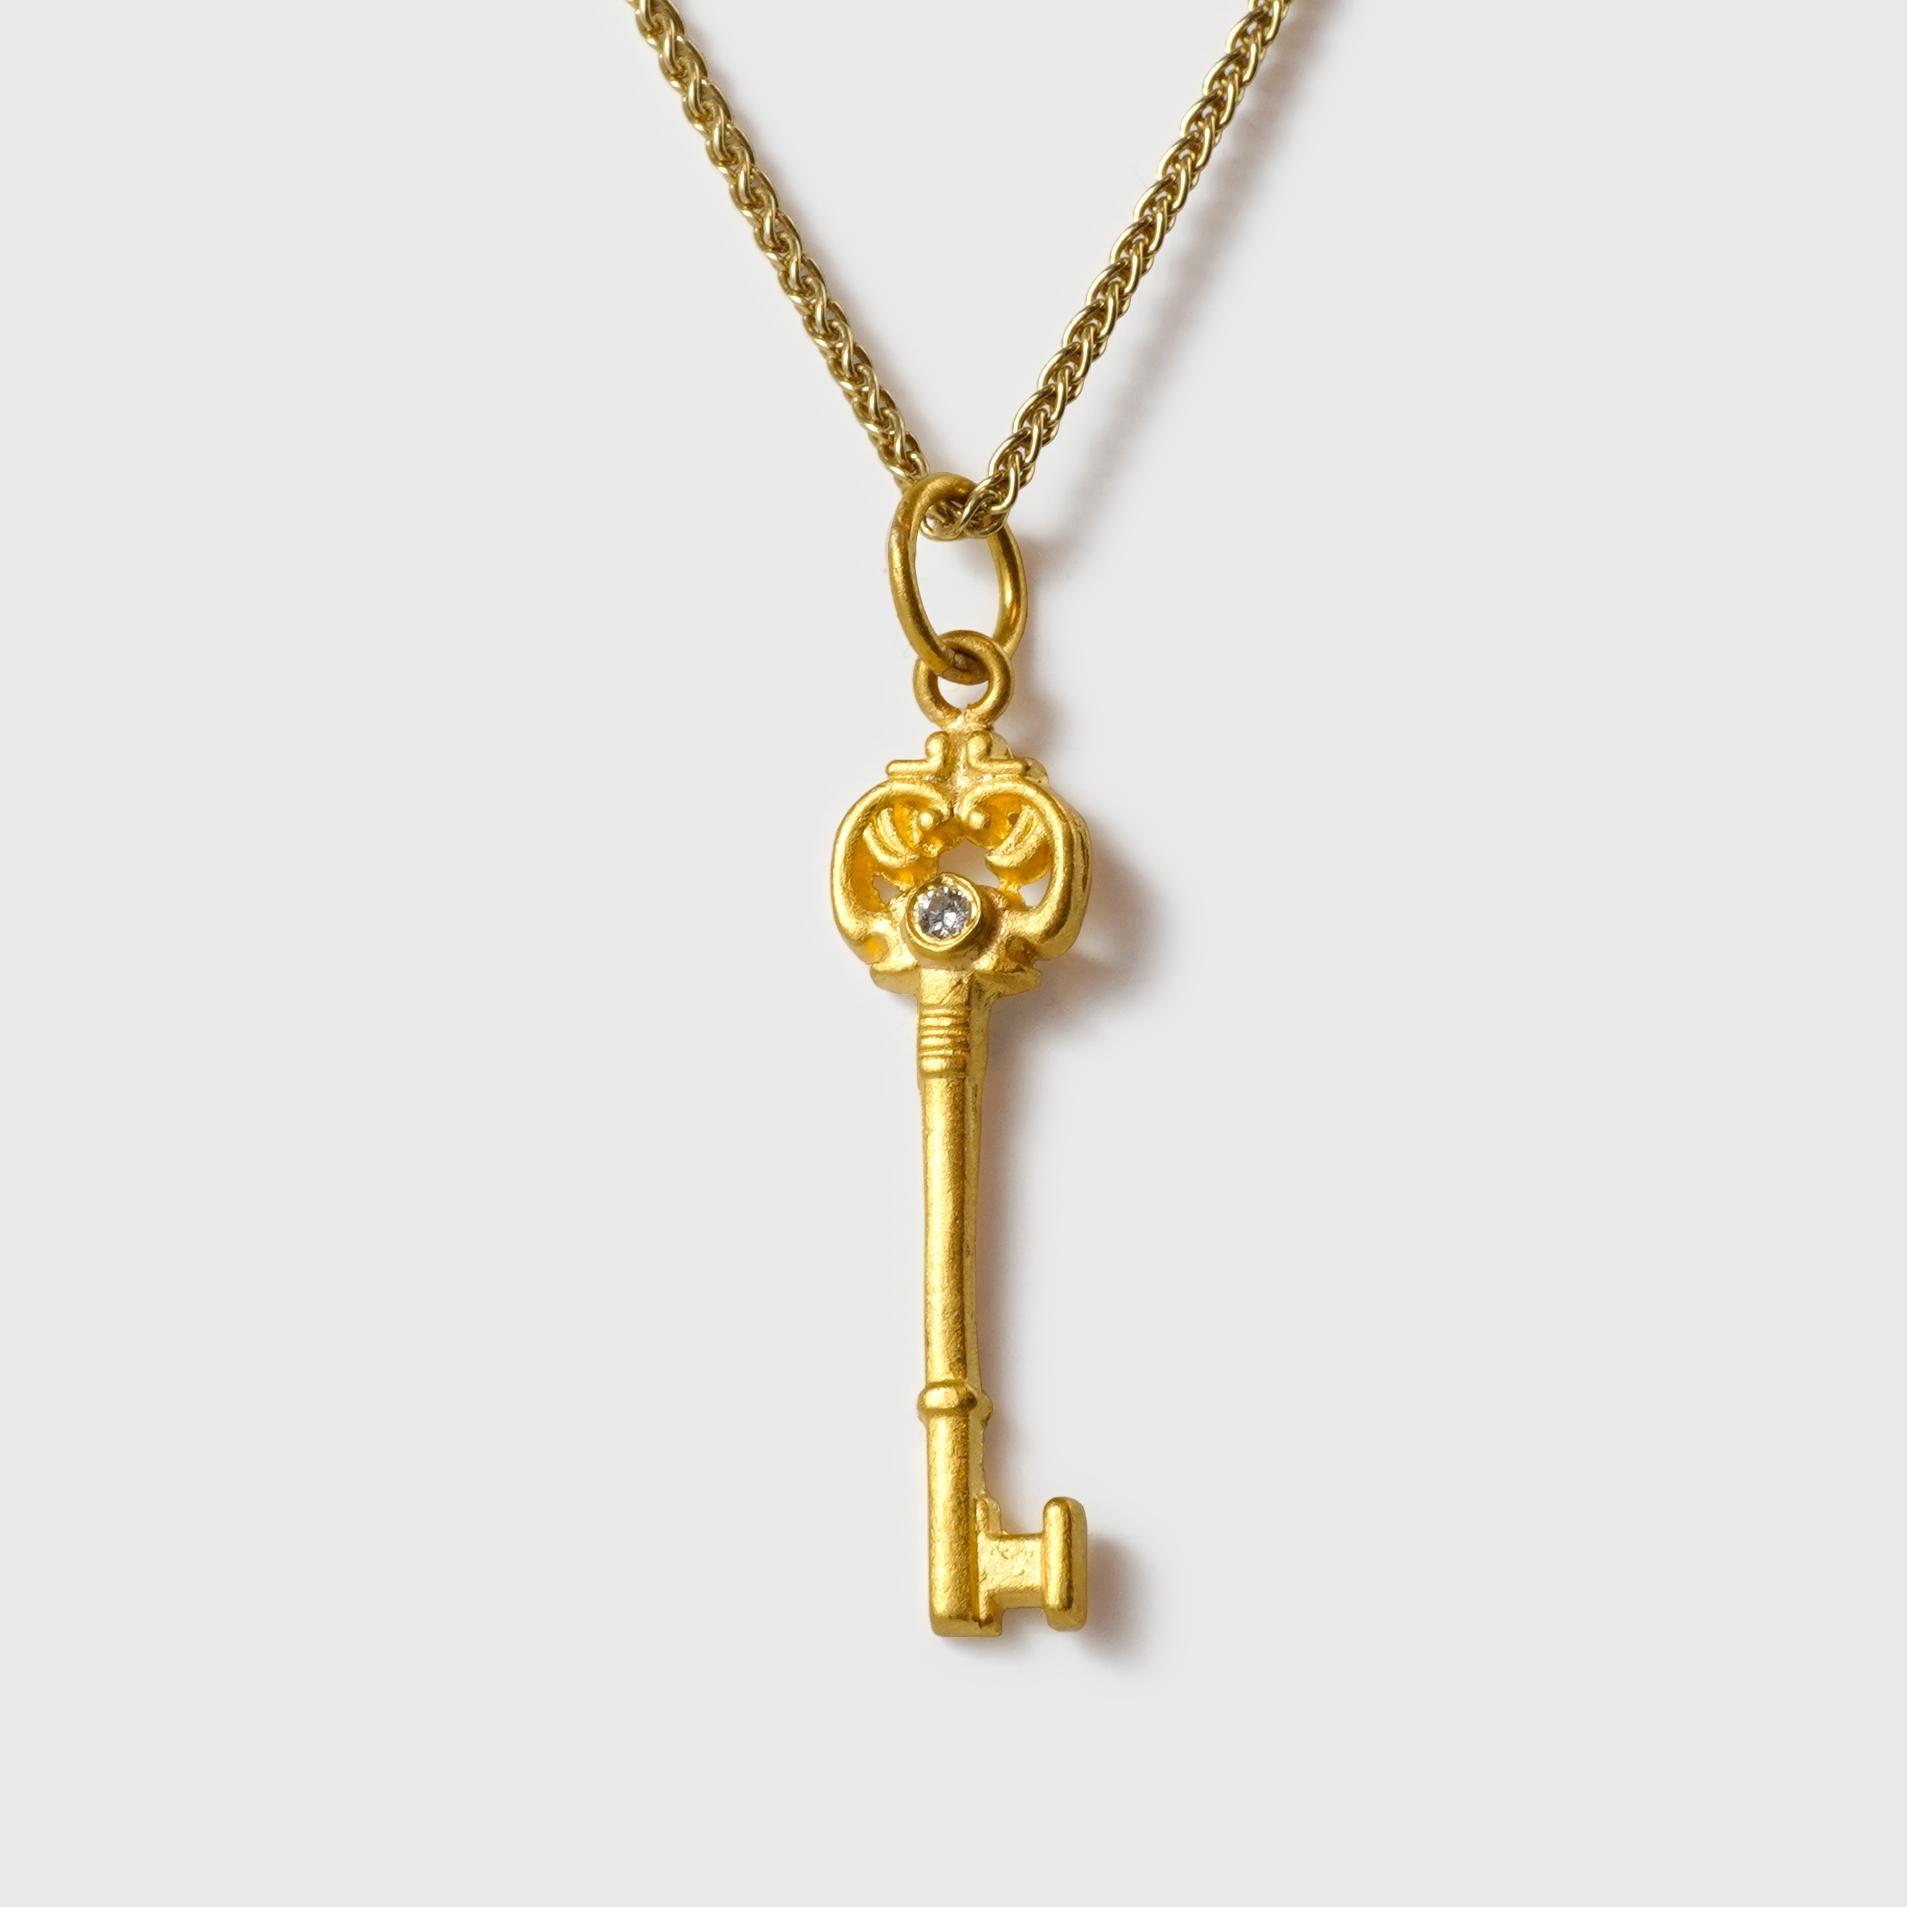 Skeleton Key and Diamond Charm Pendant, 24kt Yellow Gold and 0.02ct Diamonds, comes with 16